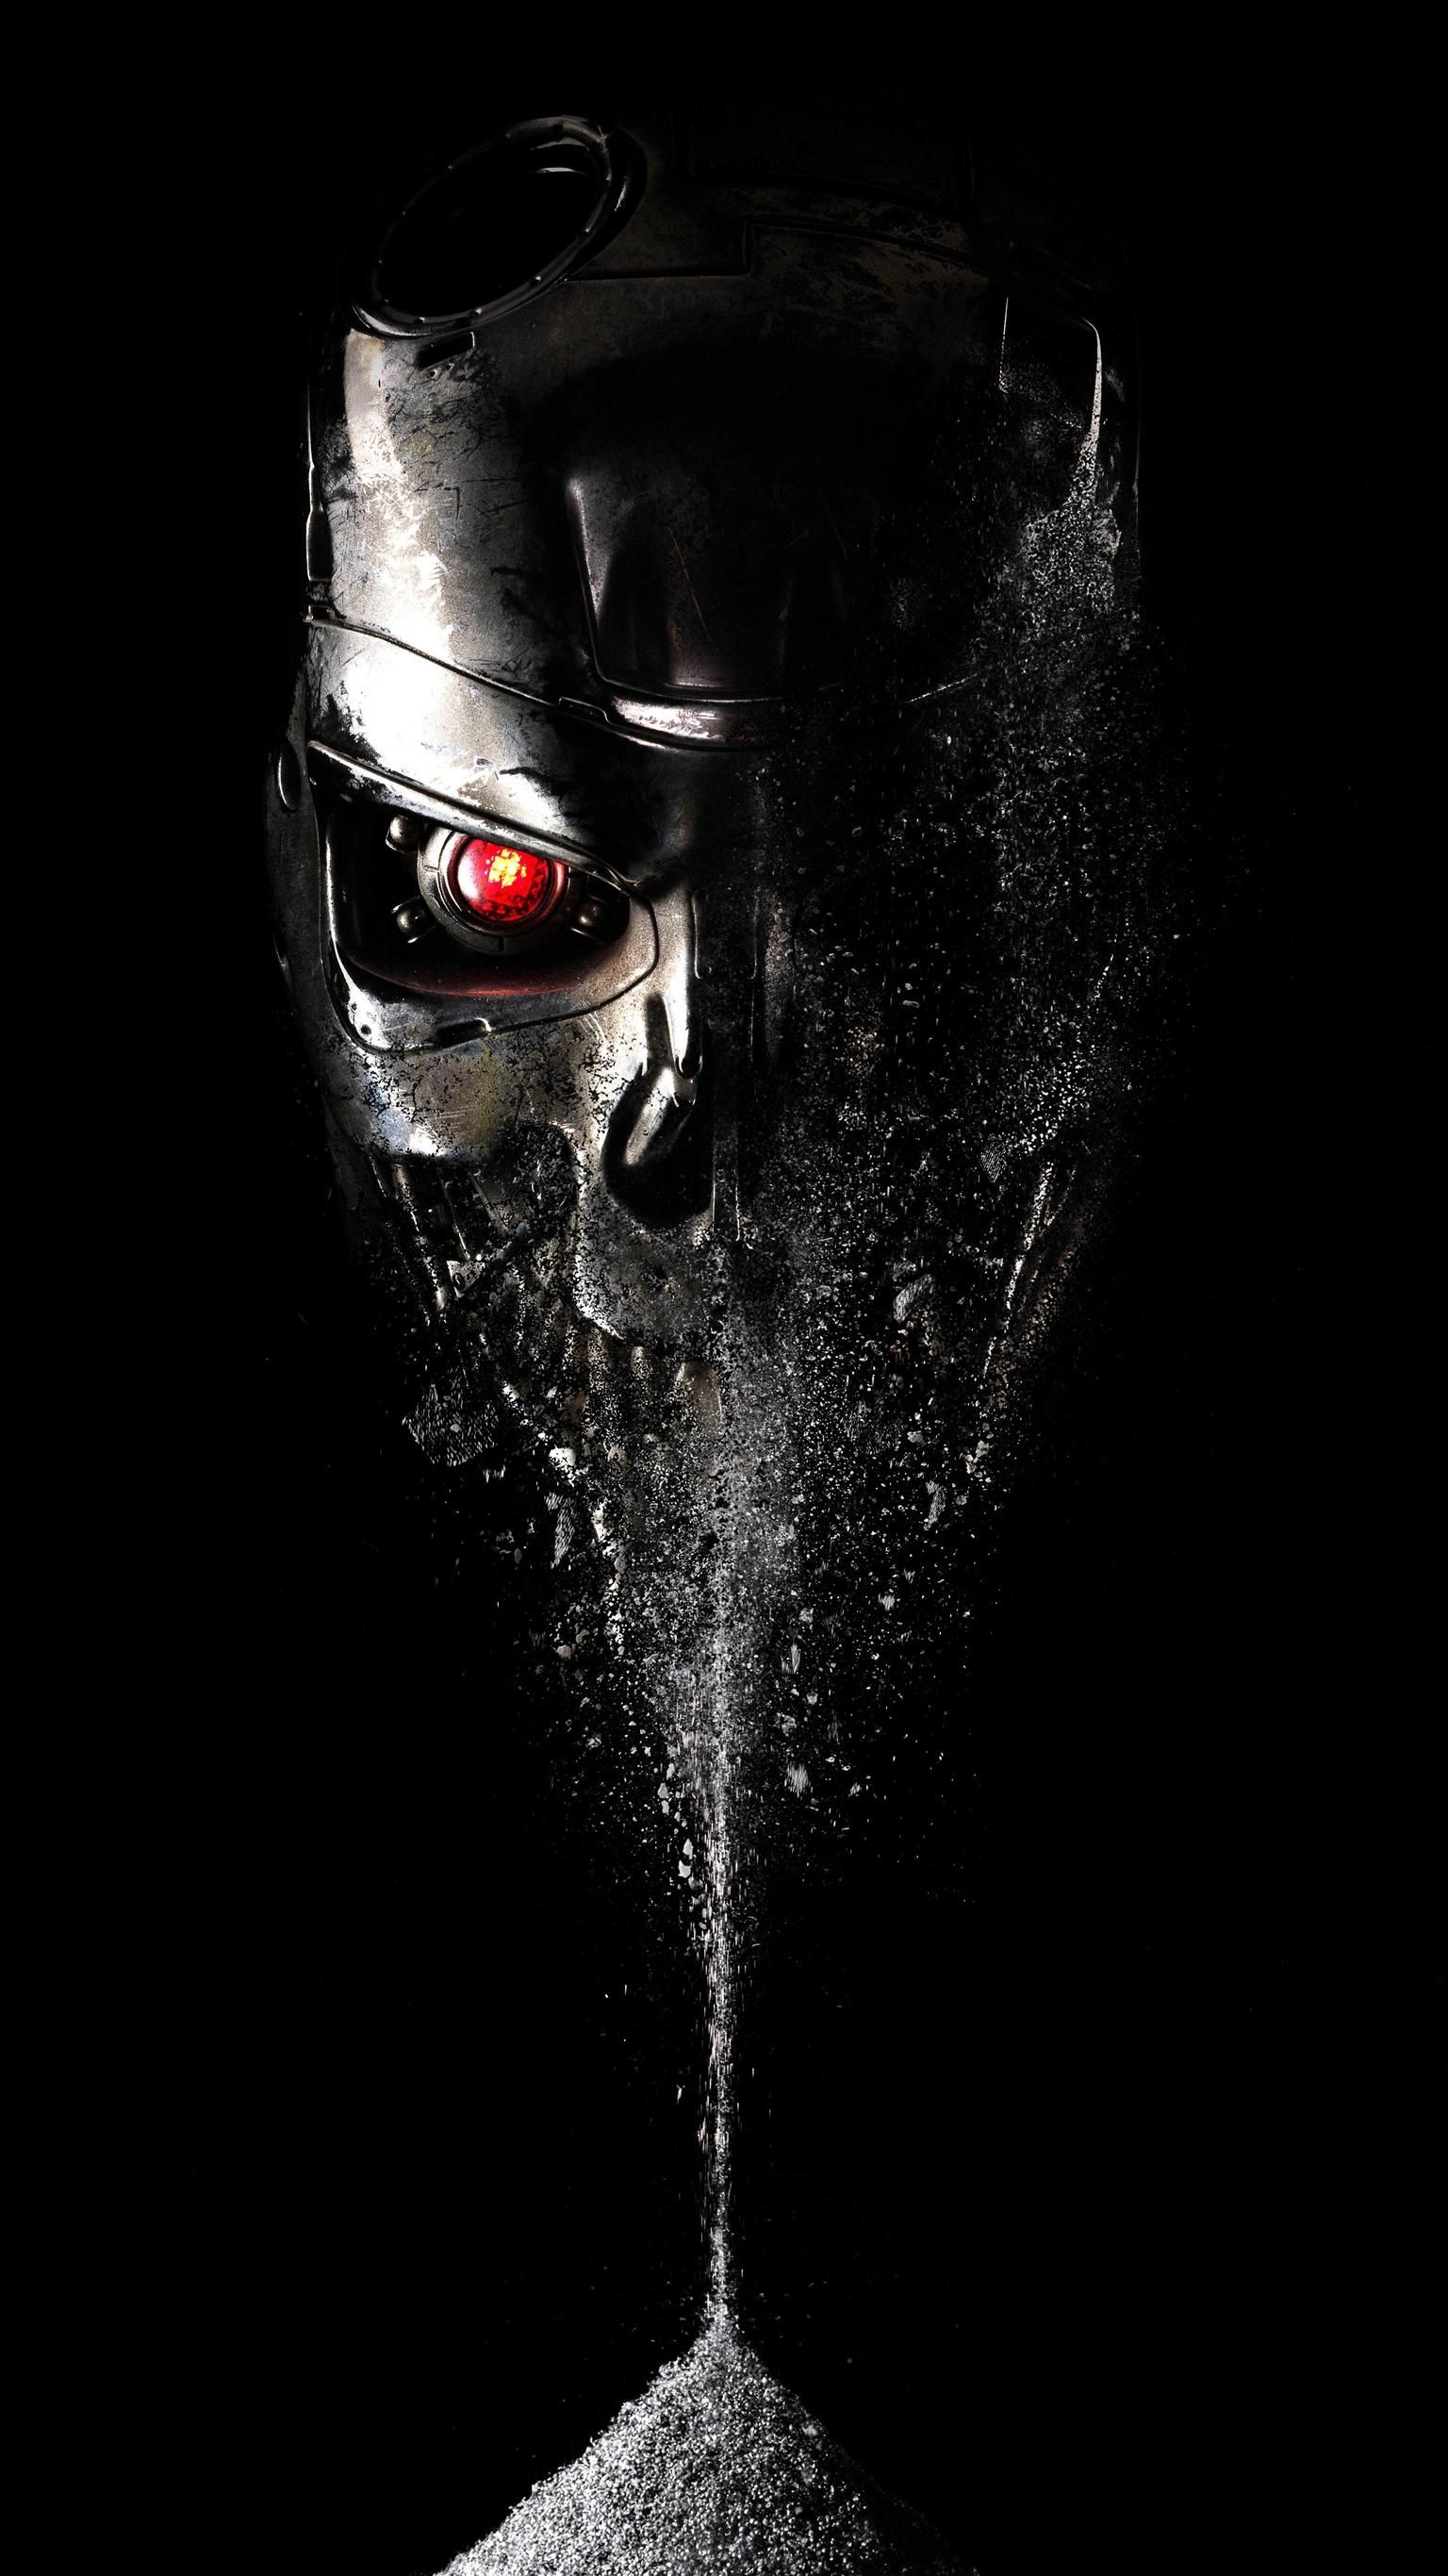 Genisys invasion, Phone wallpaper, Thrilling visuals, Movie fanatic's delight, 1540x2740 HD Phone